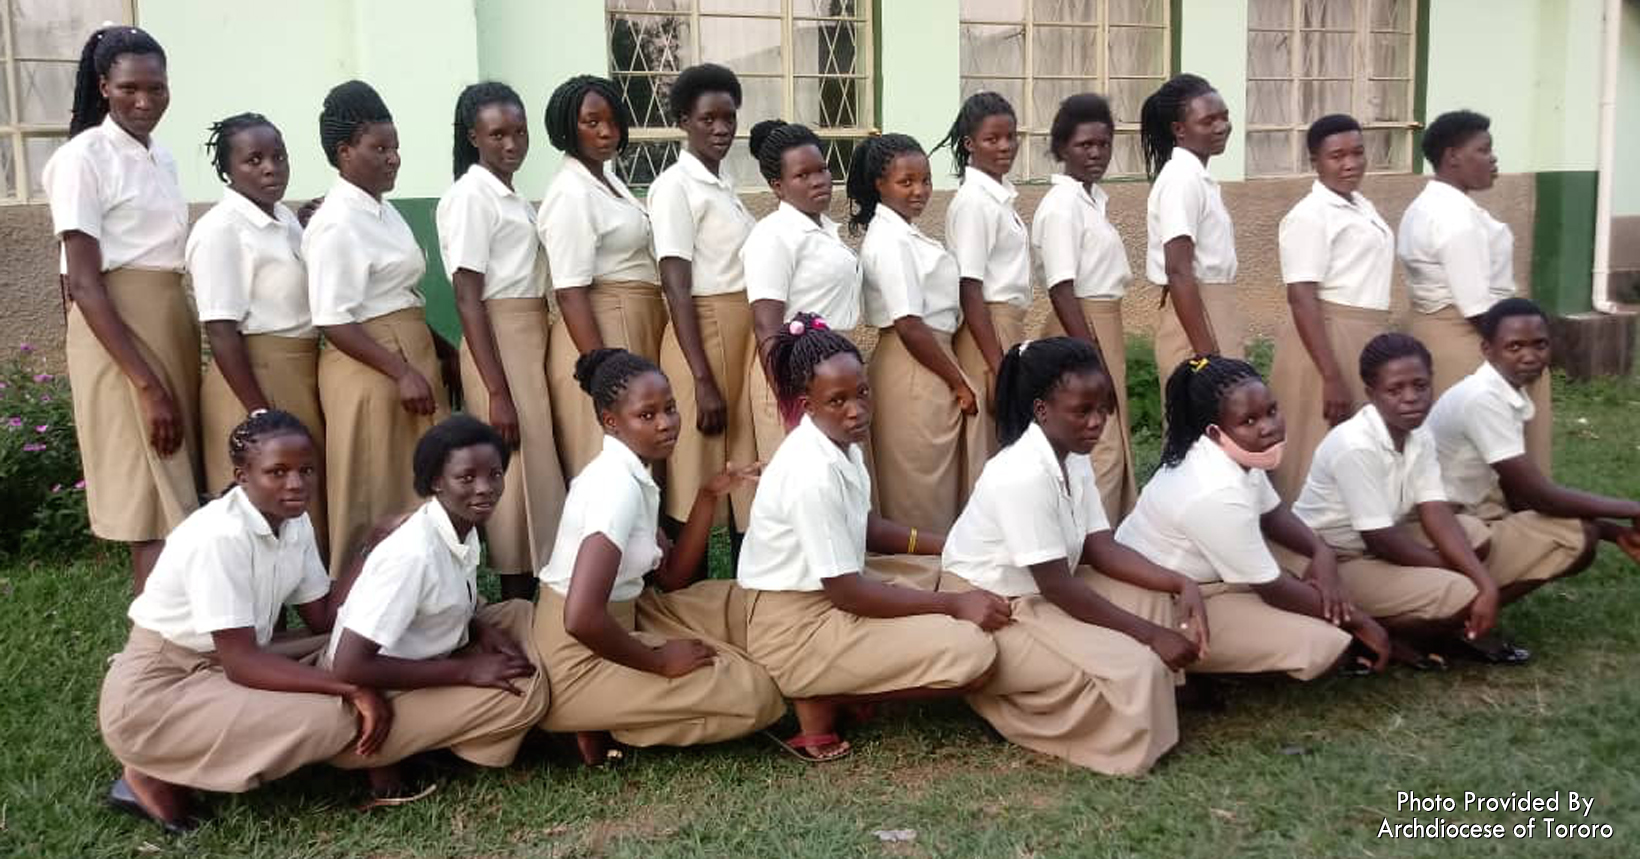 A group of young girls who are a part of the Vocational Training Institute come together for a picture.